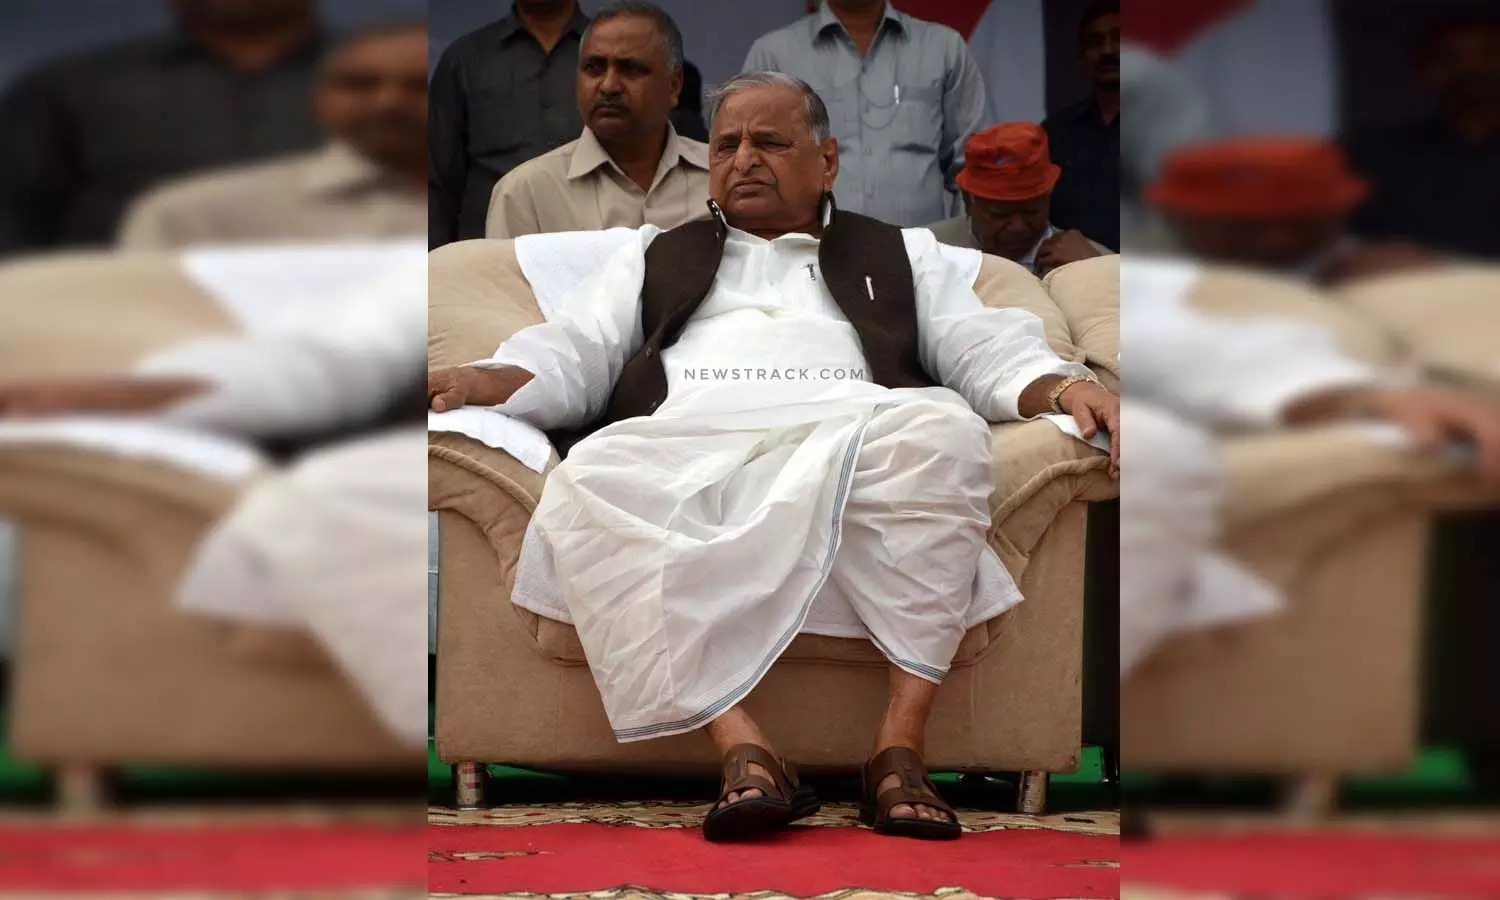 Mulayam Singh Yadav: Such was the political journey of Samajwadi Party supremo Mulayam Singh Yadav, see in these pictures